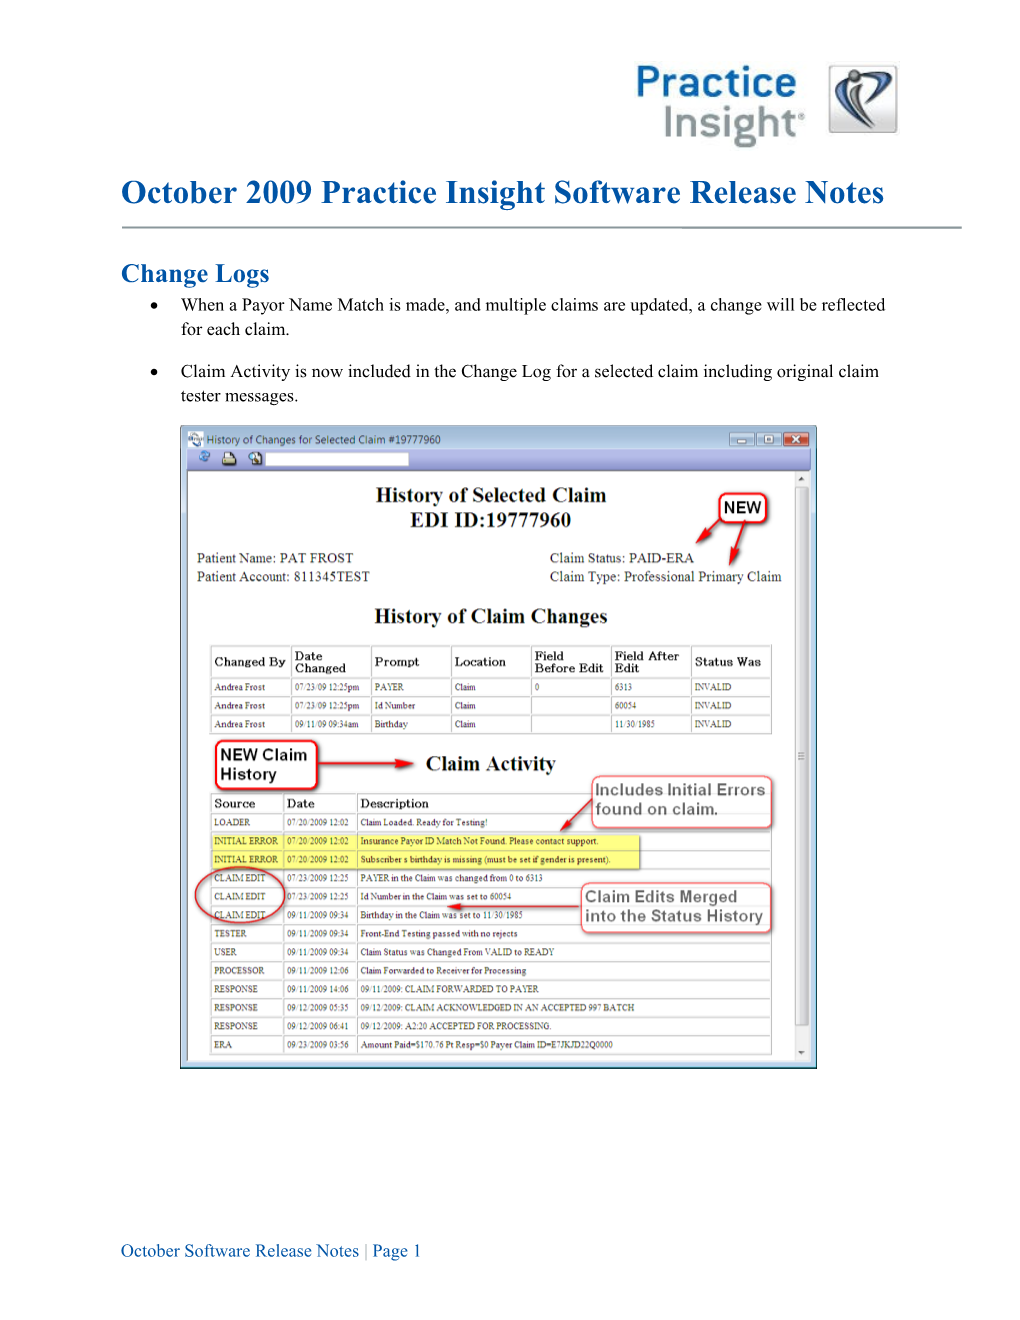 October 2009 Practice Insight Software Release Notes